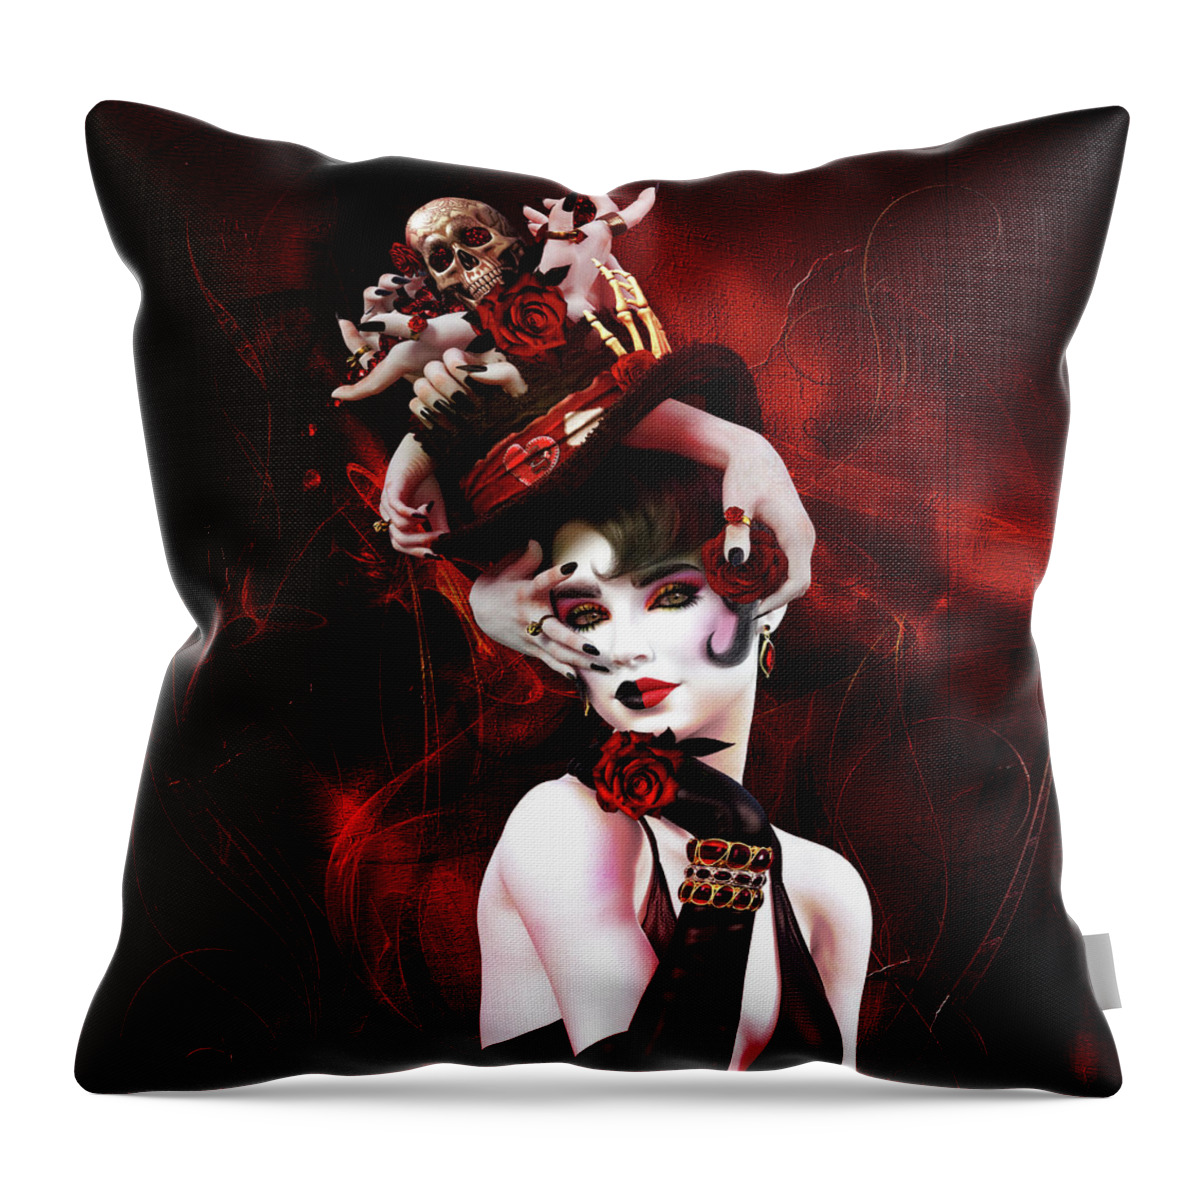 Ruby Gothic Femme Throw Pillow featuring the digital art Ruby Gothic Femme by Shanina Conway